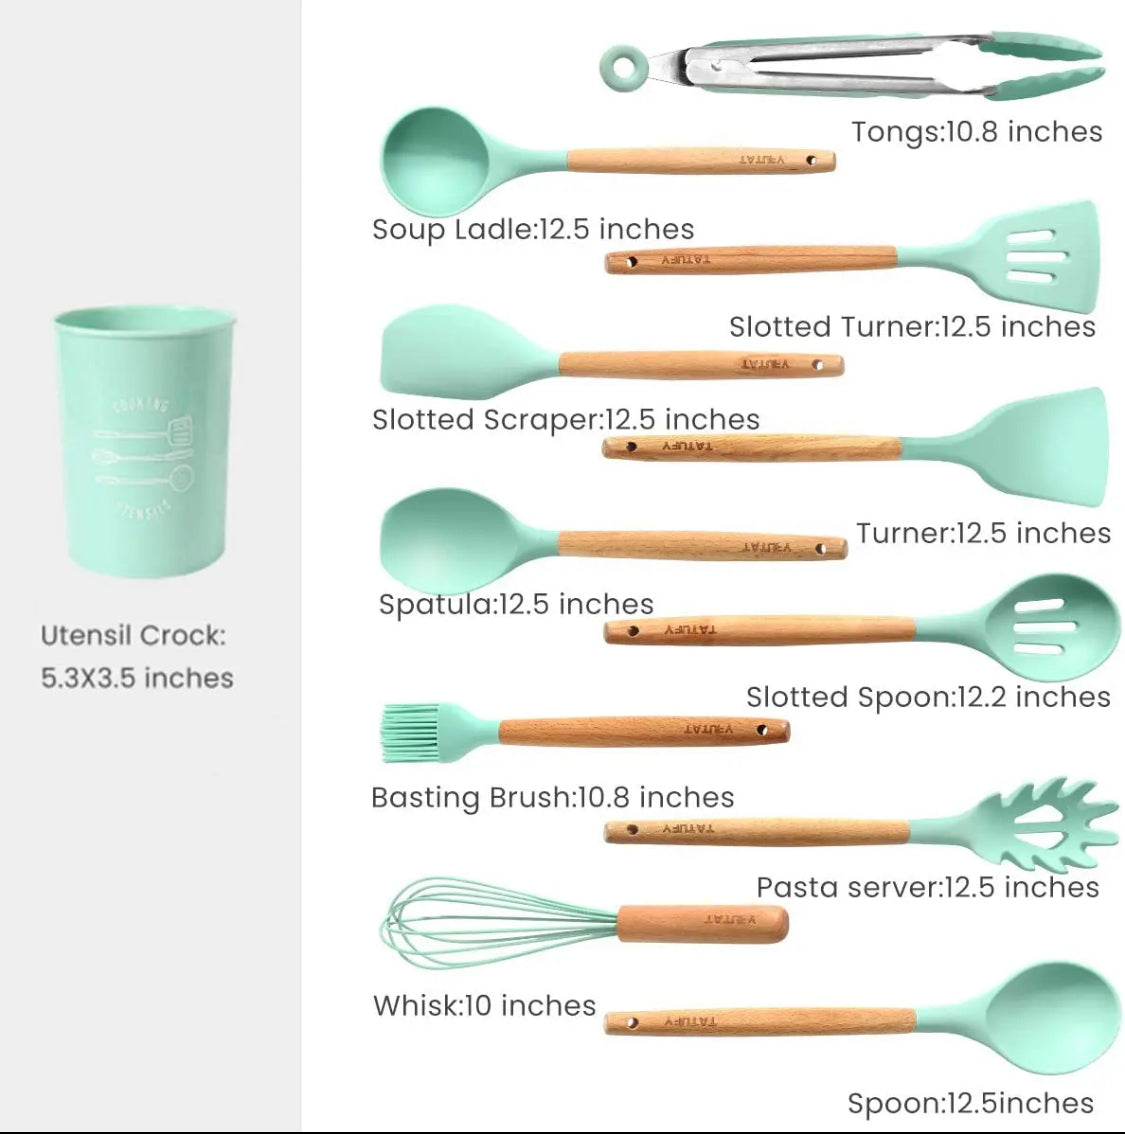 12Pcs-Silicone Kitchenware Set Kitchen Utensils Cooking Sets Non-stick Spatula Silicone Kitchen Tools with Wooden Handle Heat Resistant Non-Toxic BPA Free